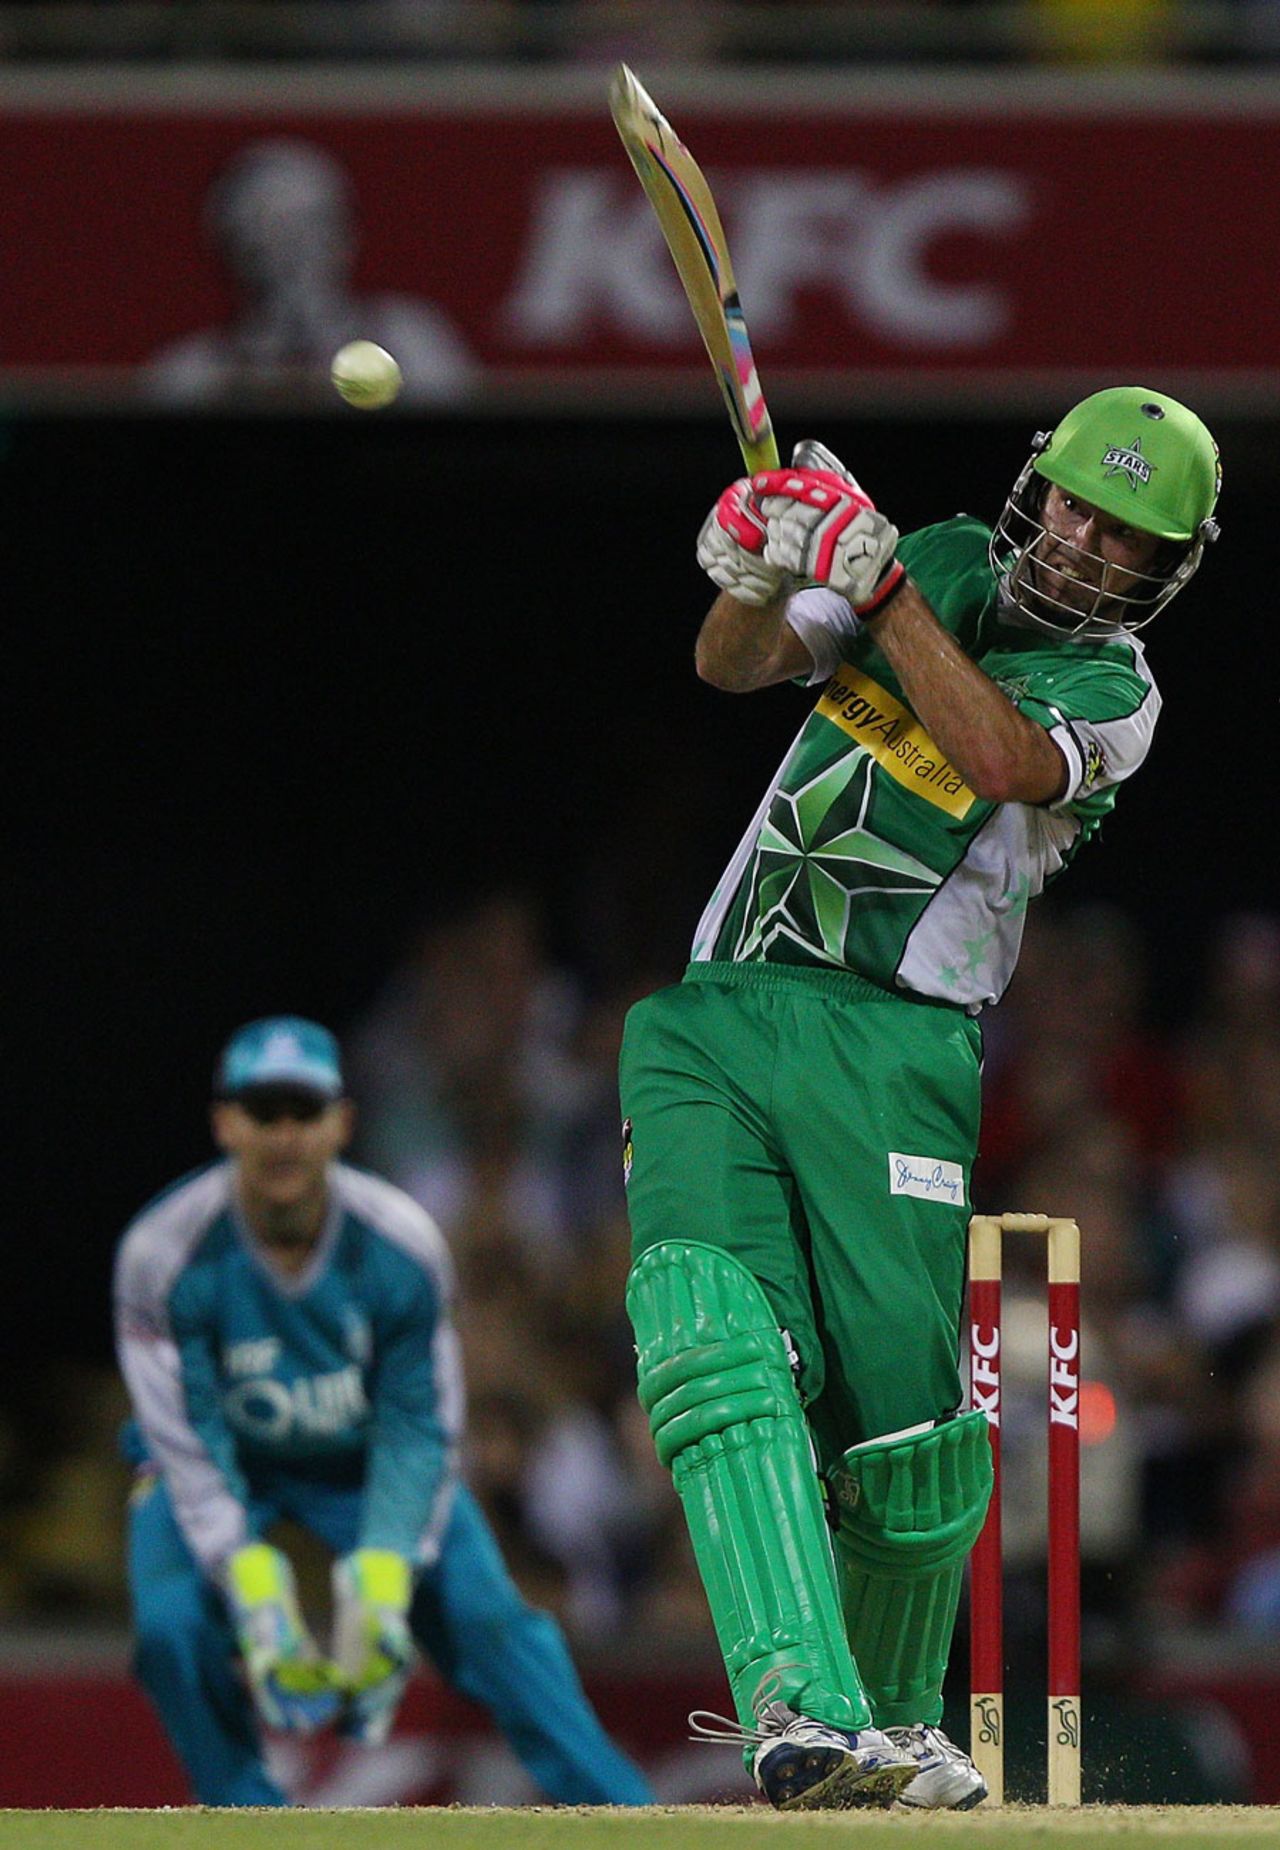 Robert Quiney hits out on his way to 97, Brisbane Heat v Melbourne Stars, BBL, Brisbane, December 20, 2011